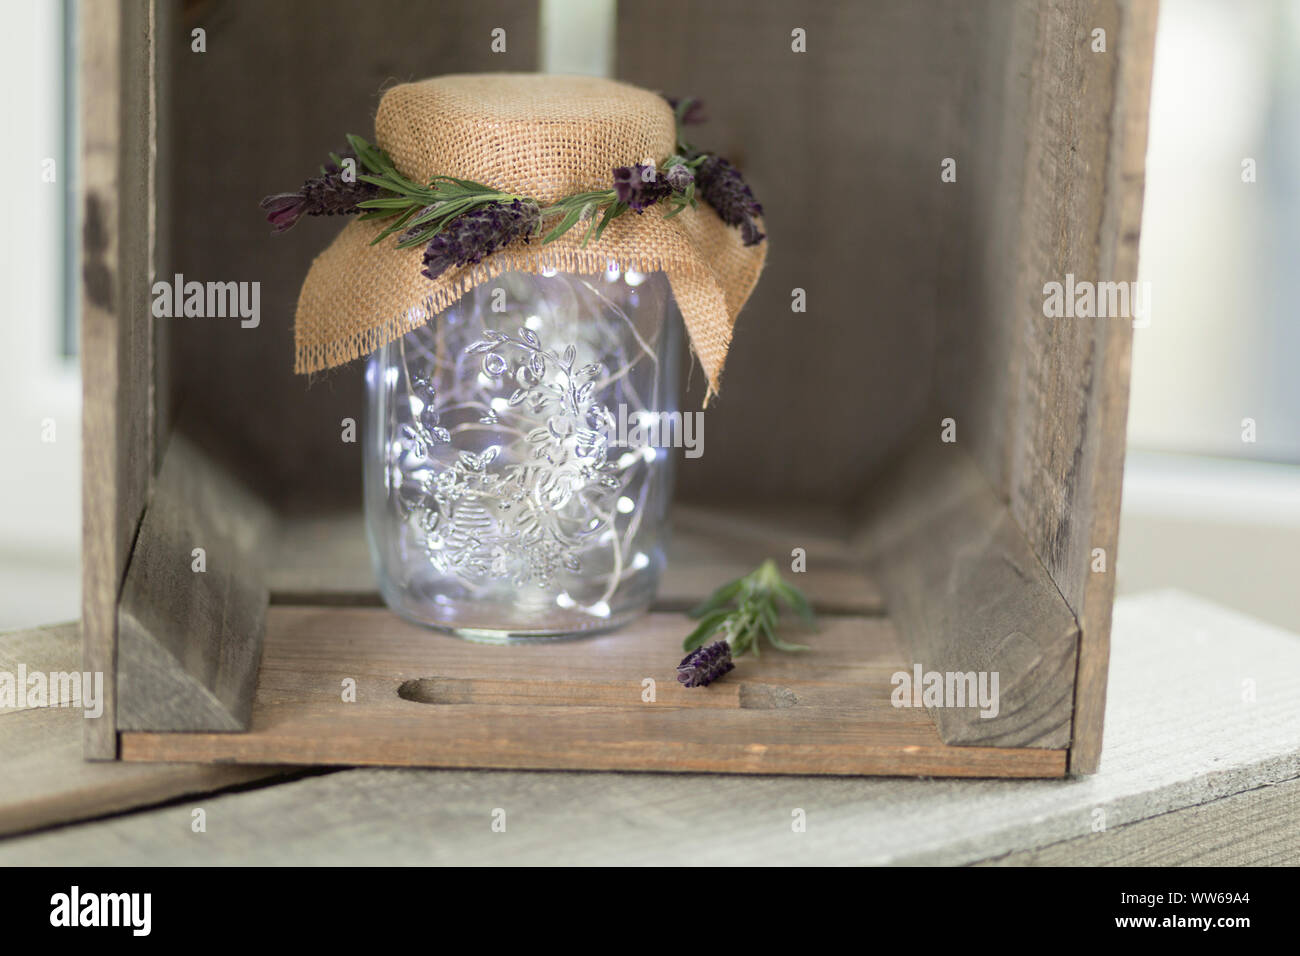 Very cute decorative glass jar/container